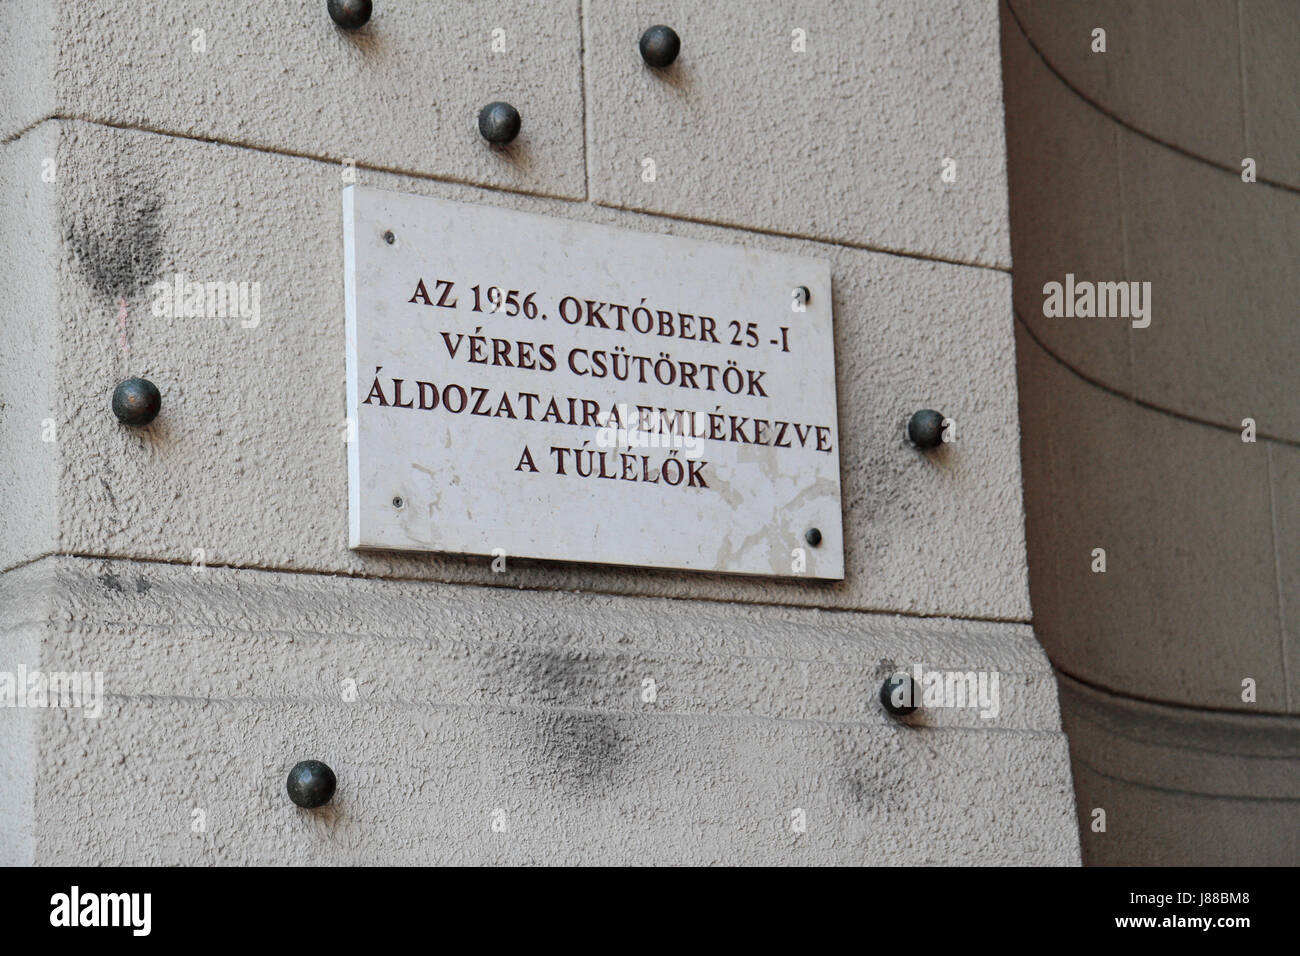 Plaque beside metal pellets marking bullet holes from 1956 revolution on Kossuth Lajos Square in Budapest, Hungary. Stock Photo